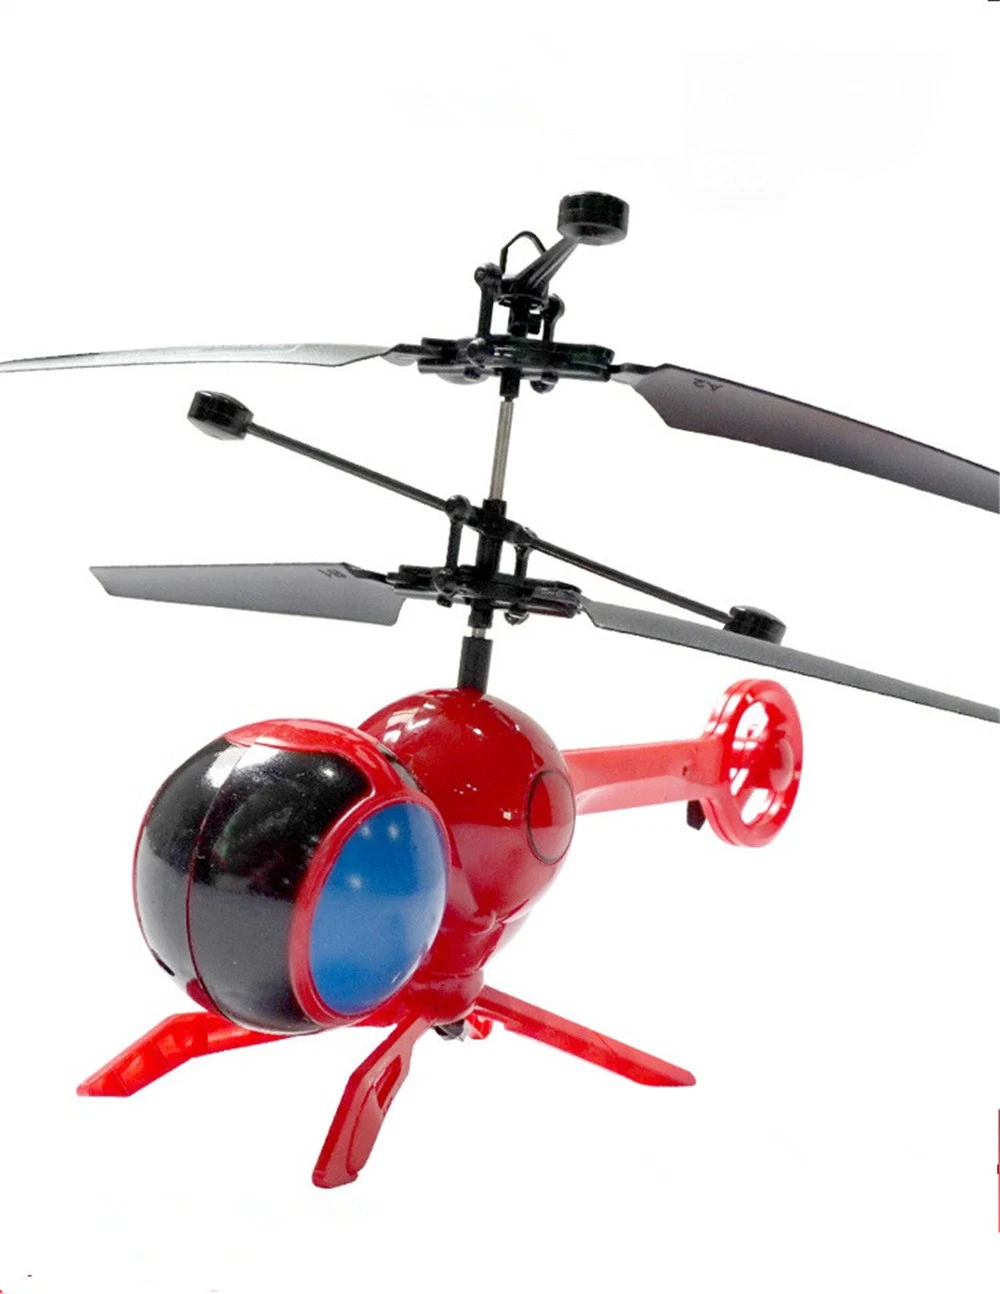 Helicopter 3 Channel Remote Control Dragonfly Helicopter